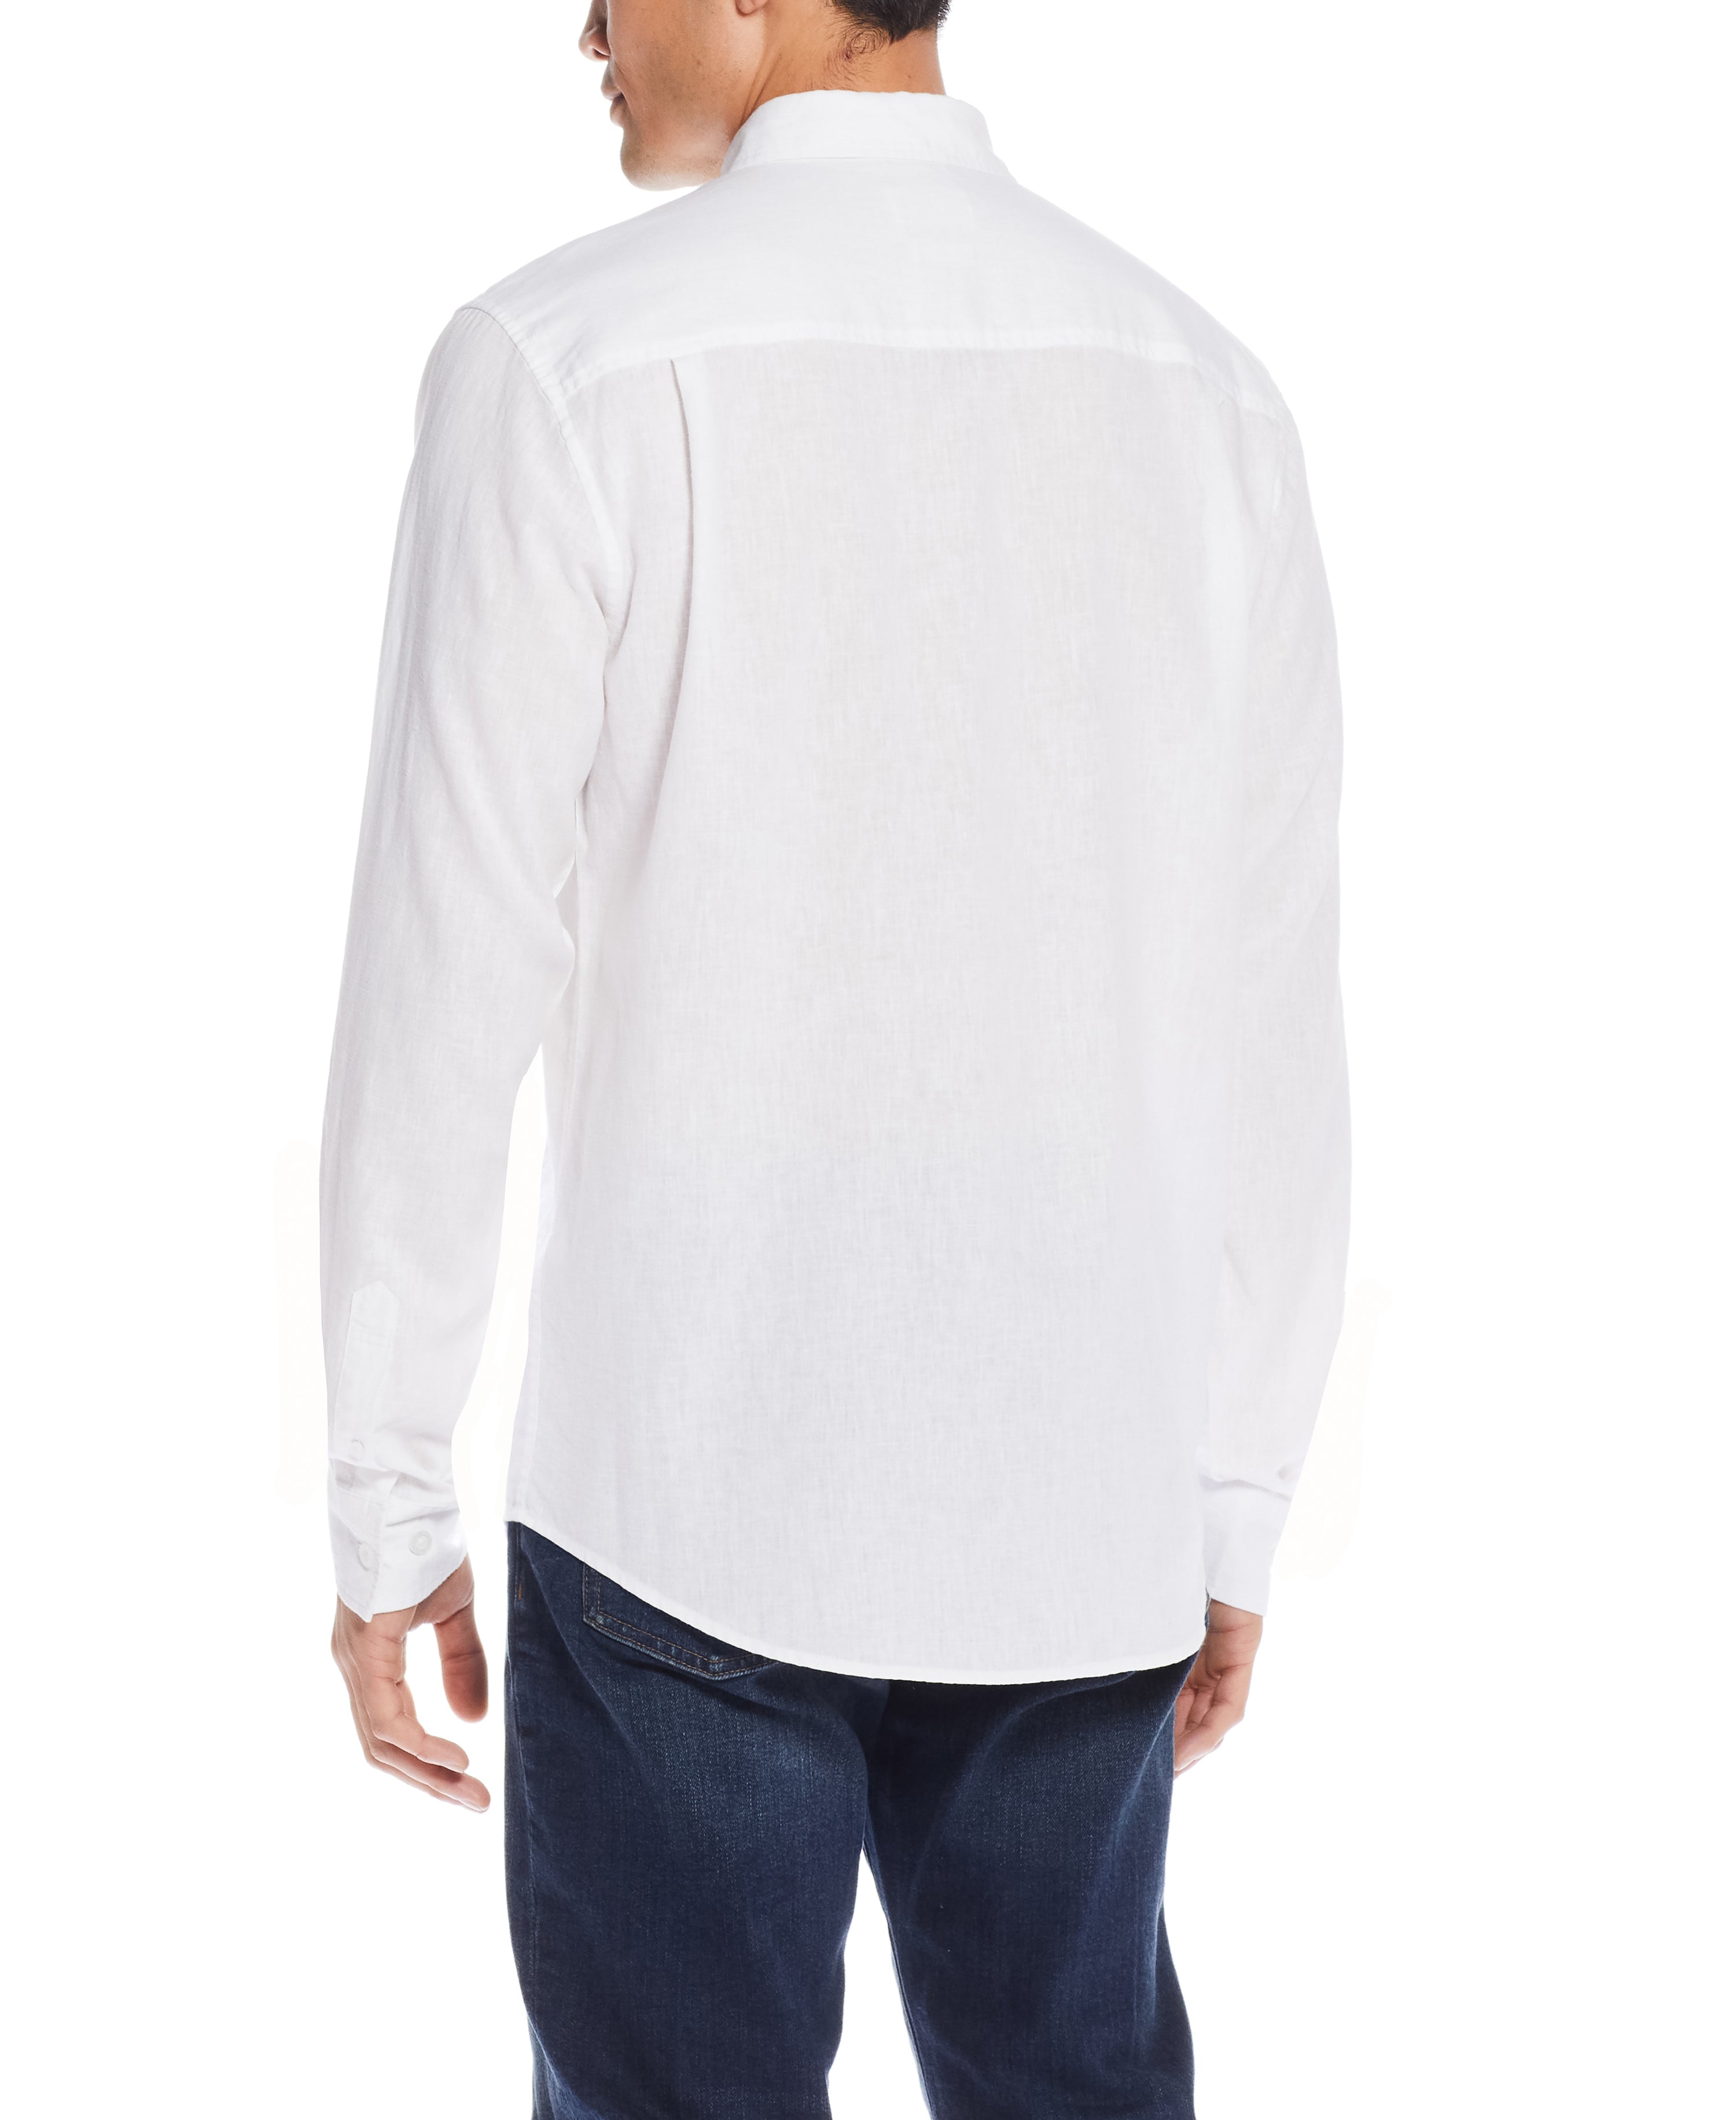 Long Sleeve Linen Cotton Shirt in Bright White